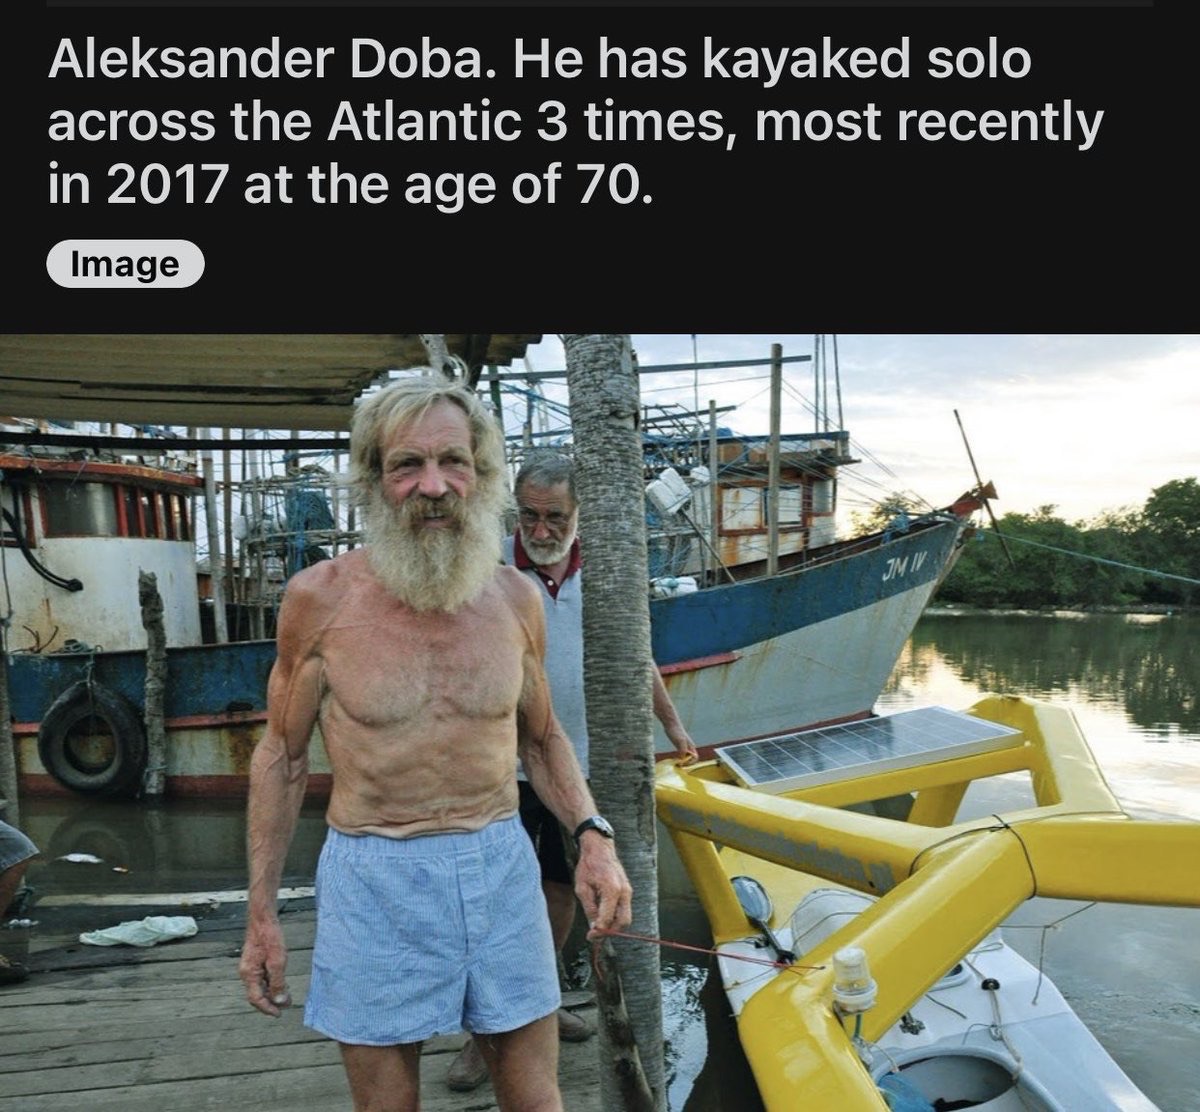 dudes post wins - 70 year old man kayaks across atlantic - Aleksander Doba. He has kayaked solo across the Atlantic 3 times, most recently in 2017 at the age of 70. Image Ji